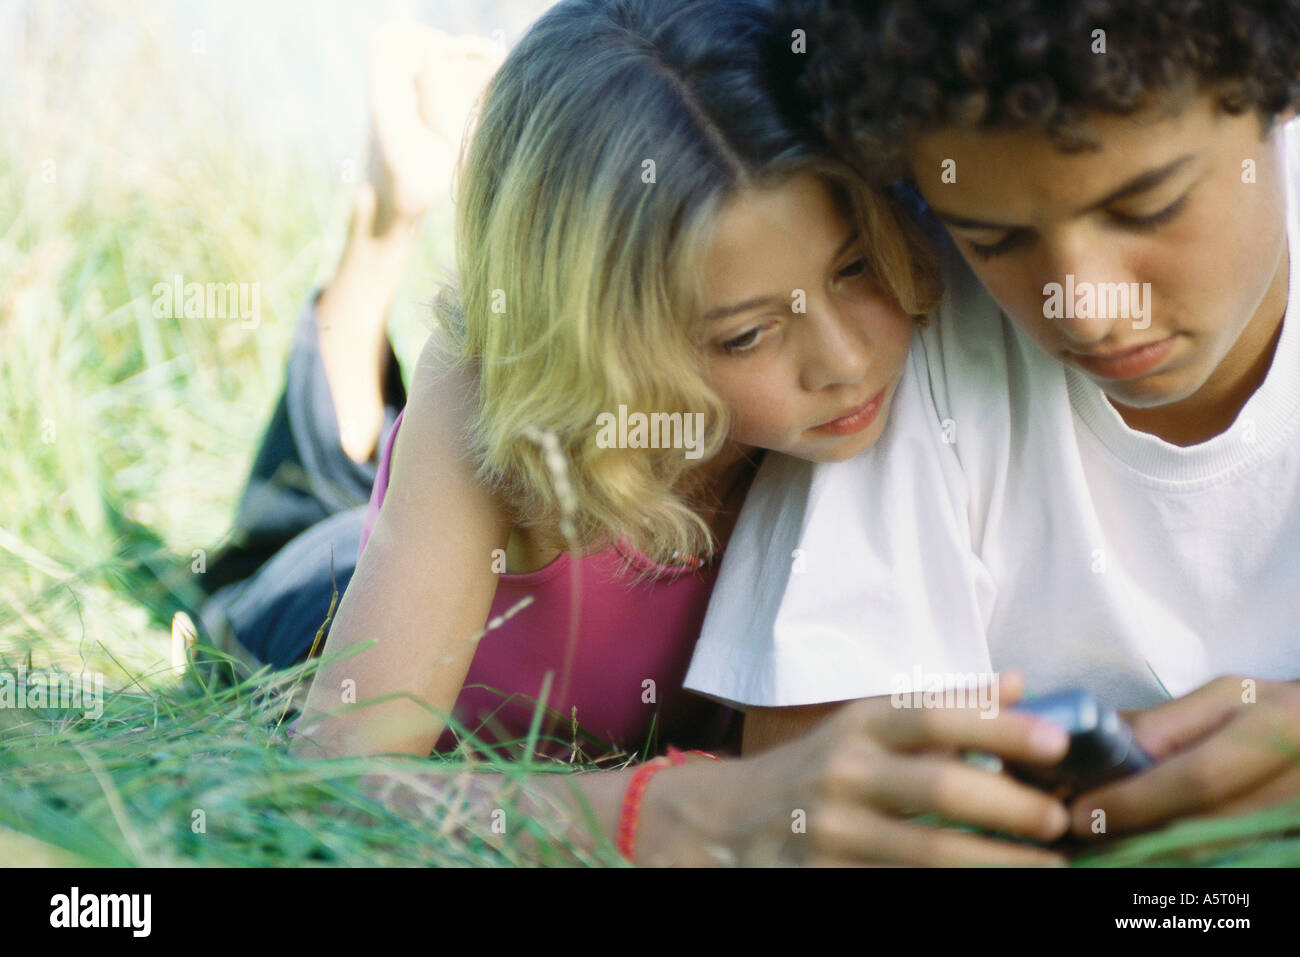 Boy and girl lying in grass, looking at cell phone Banque D'Images